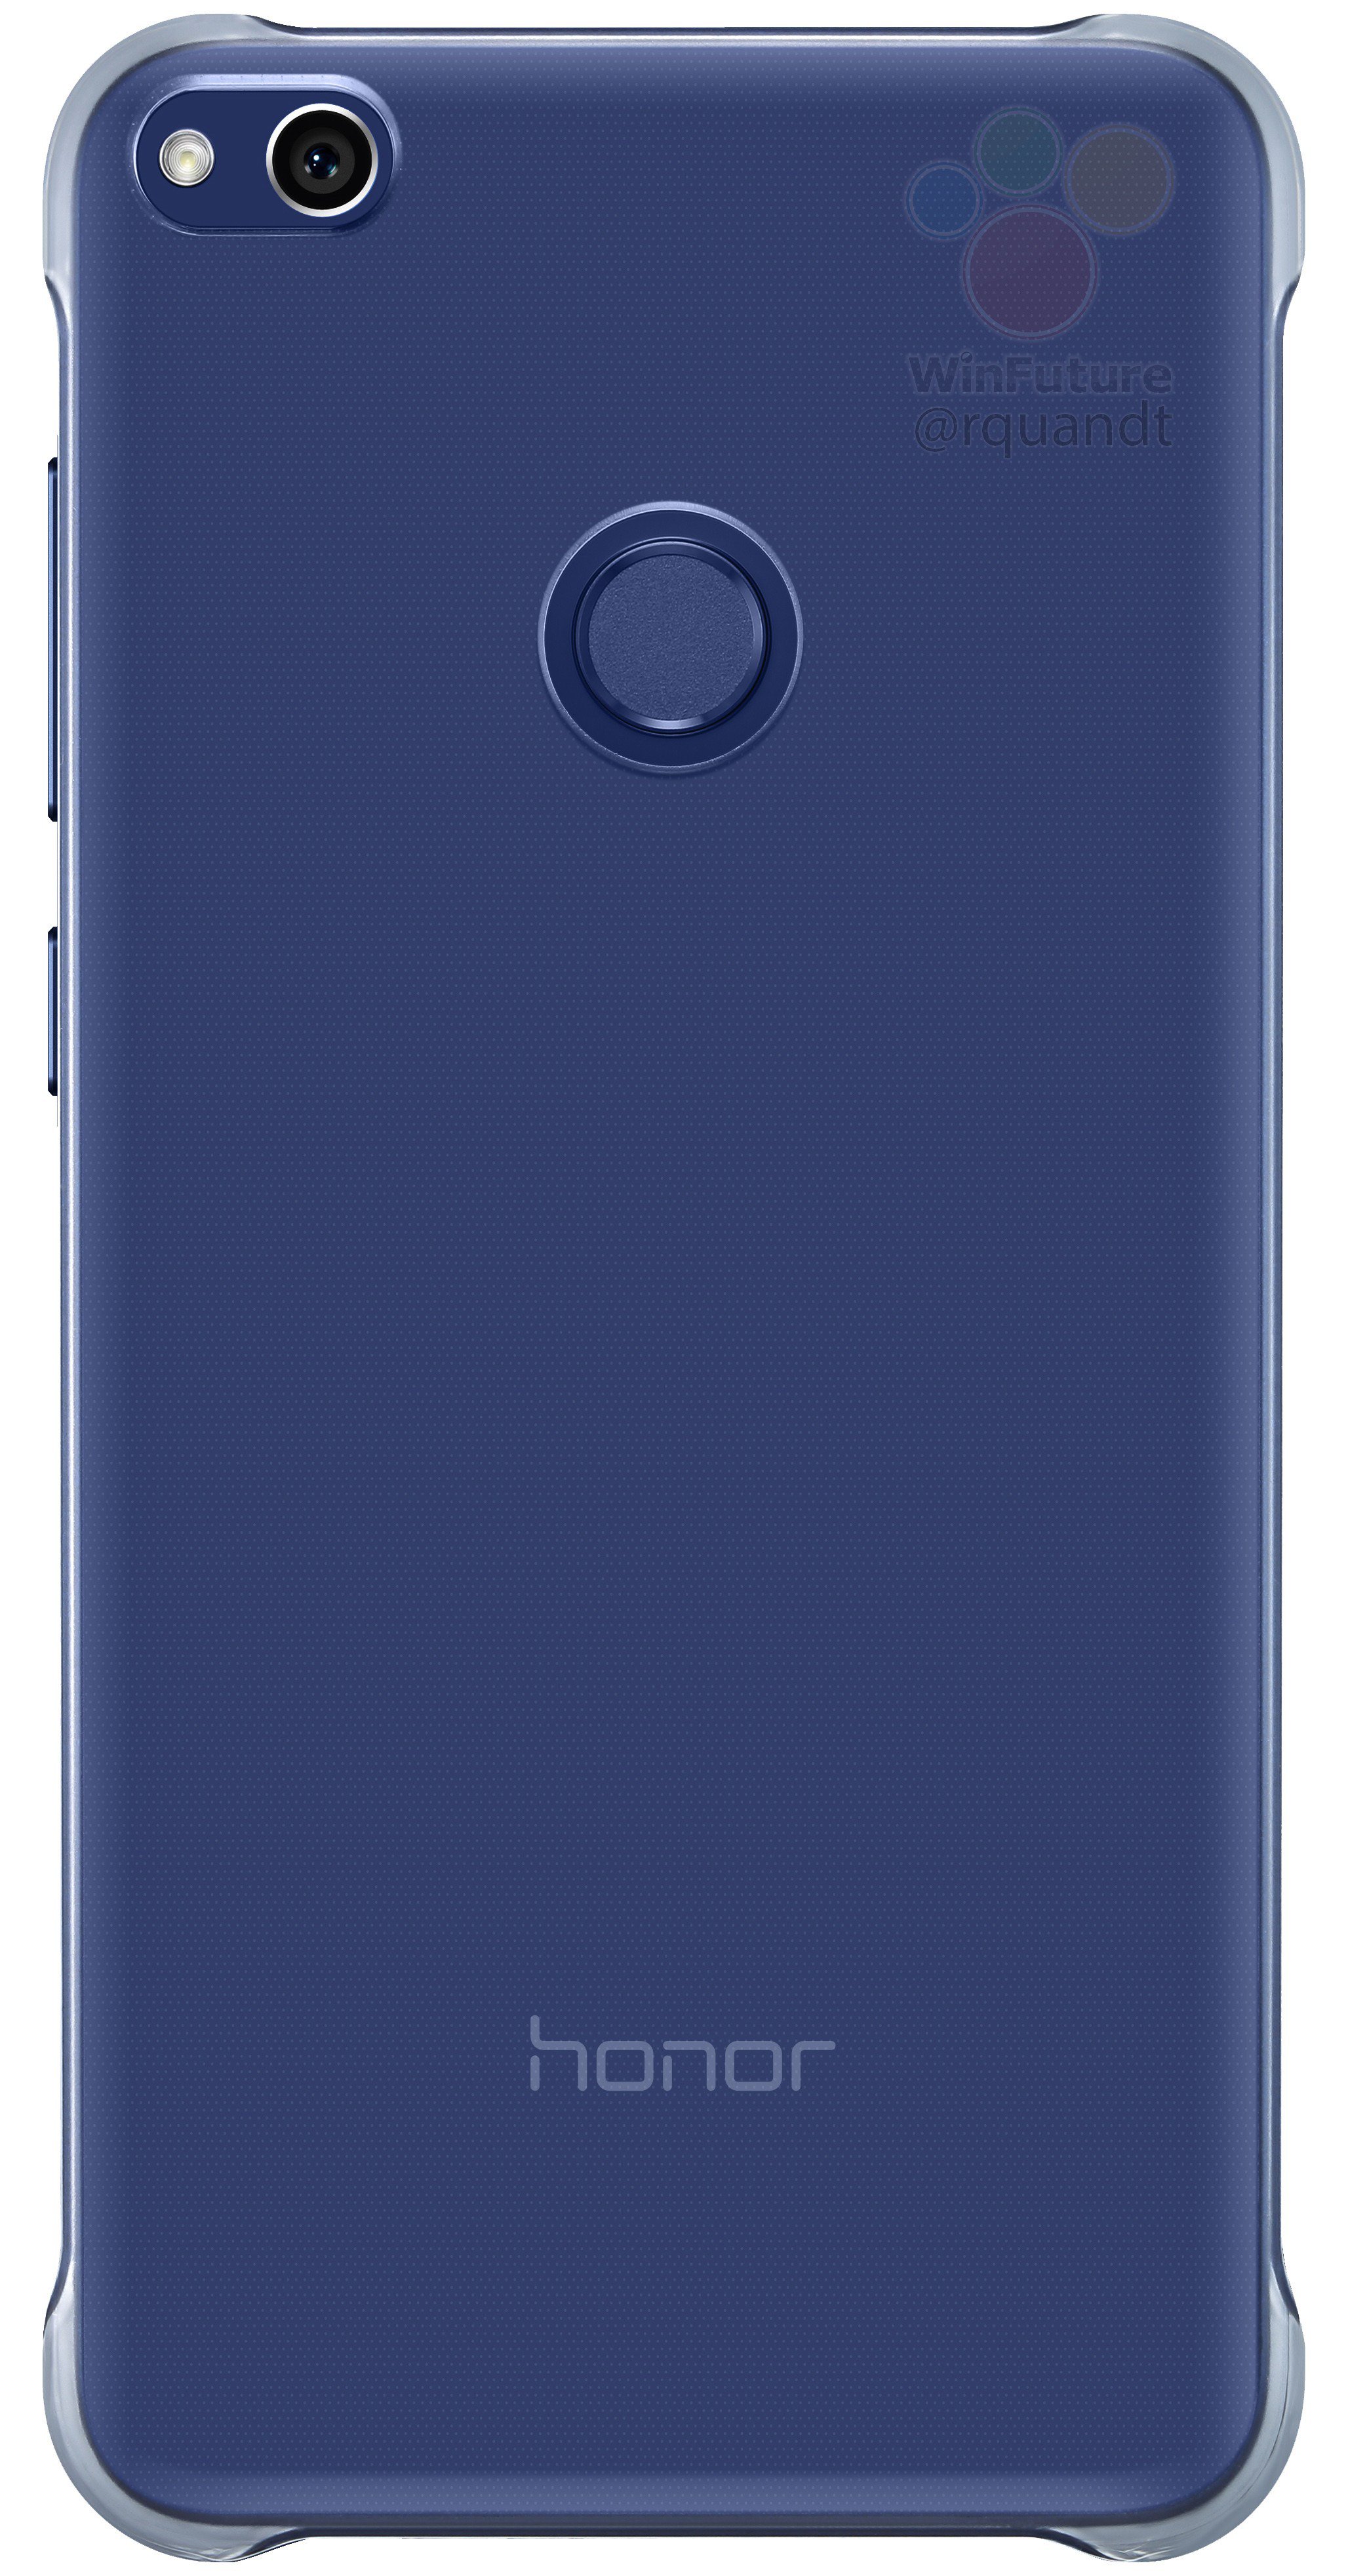 voorjaar Wees Nat Roland Quandt on Twitter: "Huawei Honor 8 Lite (in a case) - Available from  early March (= MWC launch?. ~280 Euro. Blue, Black, Gold, White models.  (1/2) https://t.co/4l7XZXL05f" / Twitter